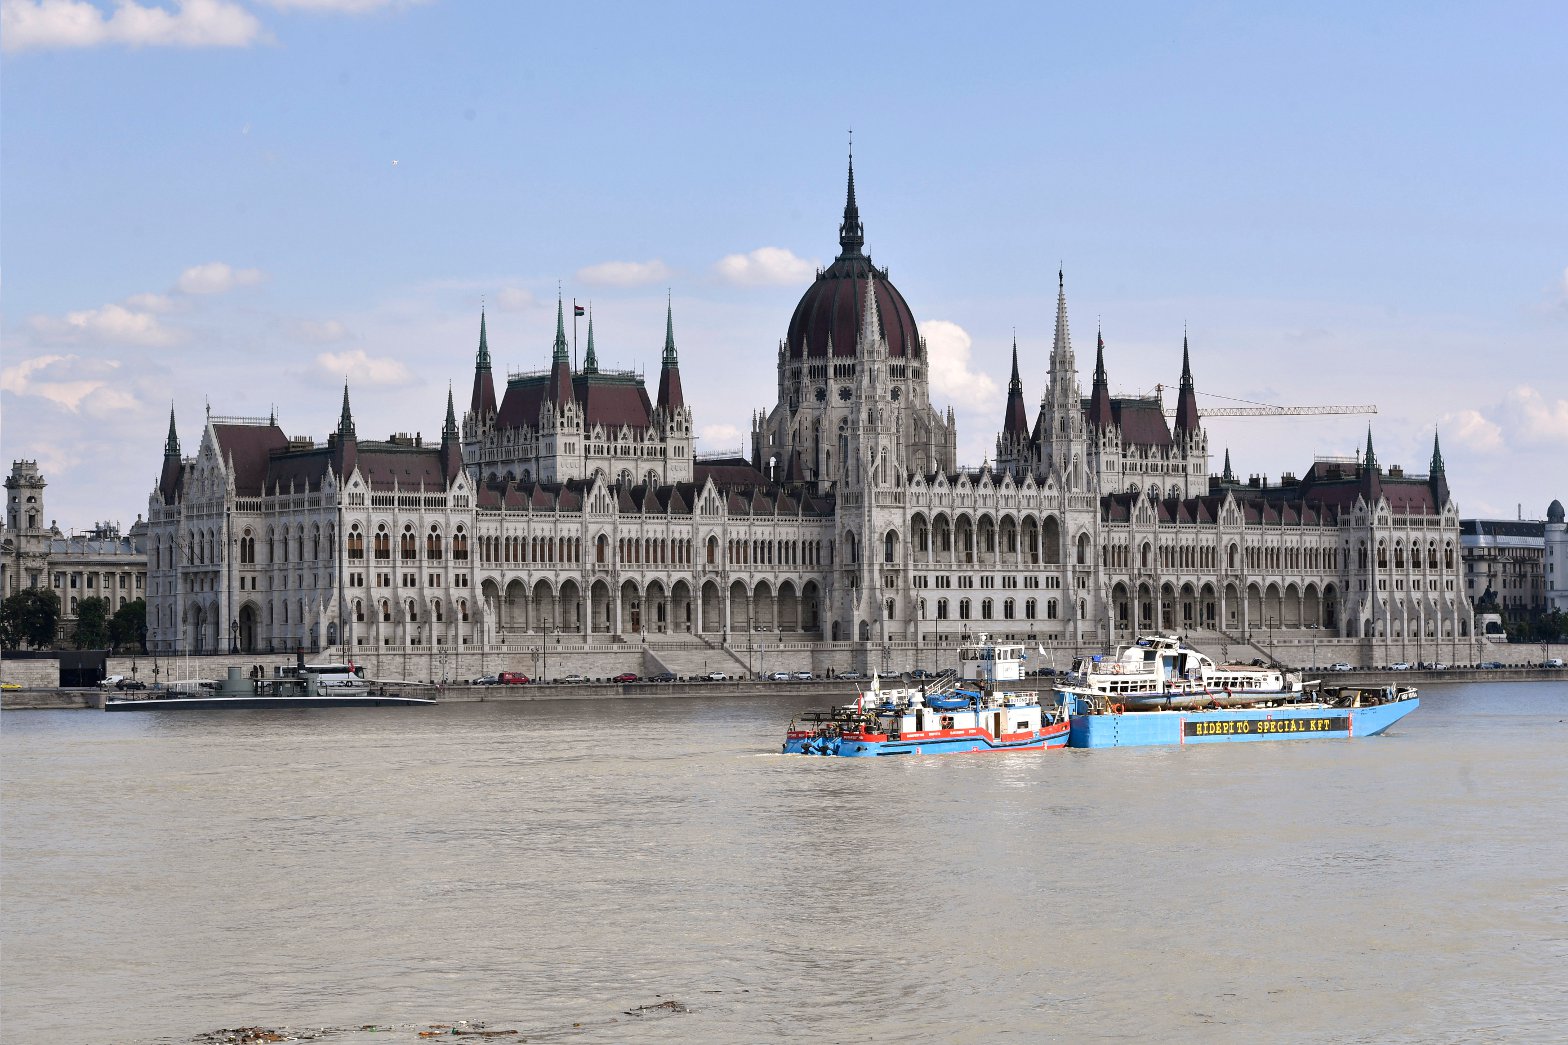 South Korea PM Expresses Thanks For Hungary’s Efforts Over Danube Ship Collision